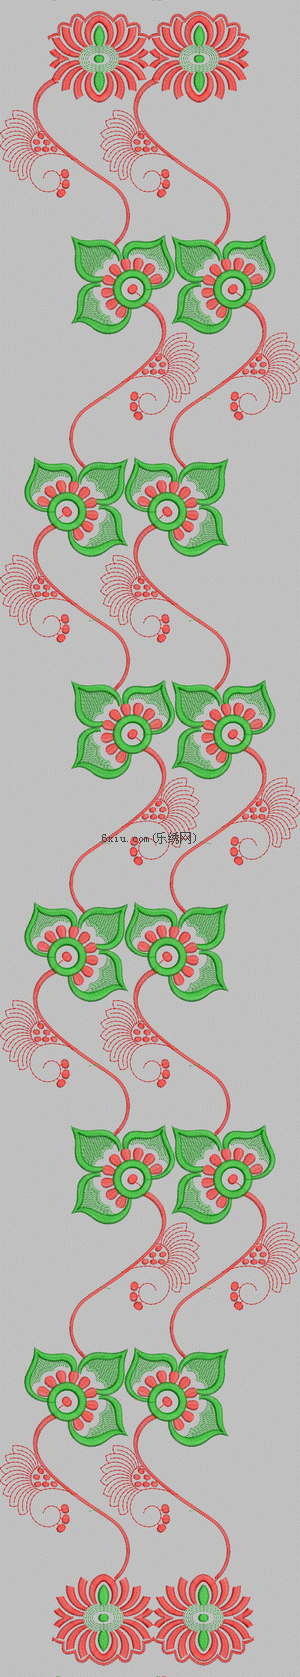 Curtain plate embroidery pattern album